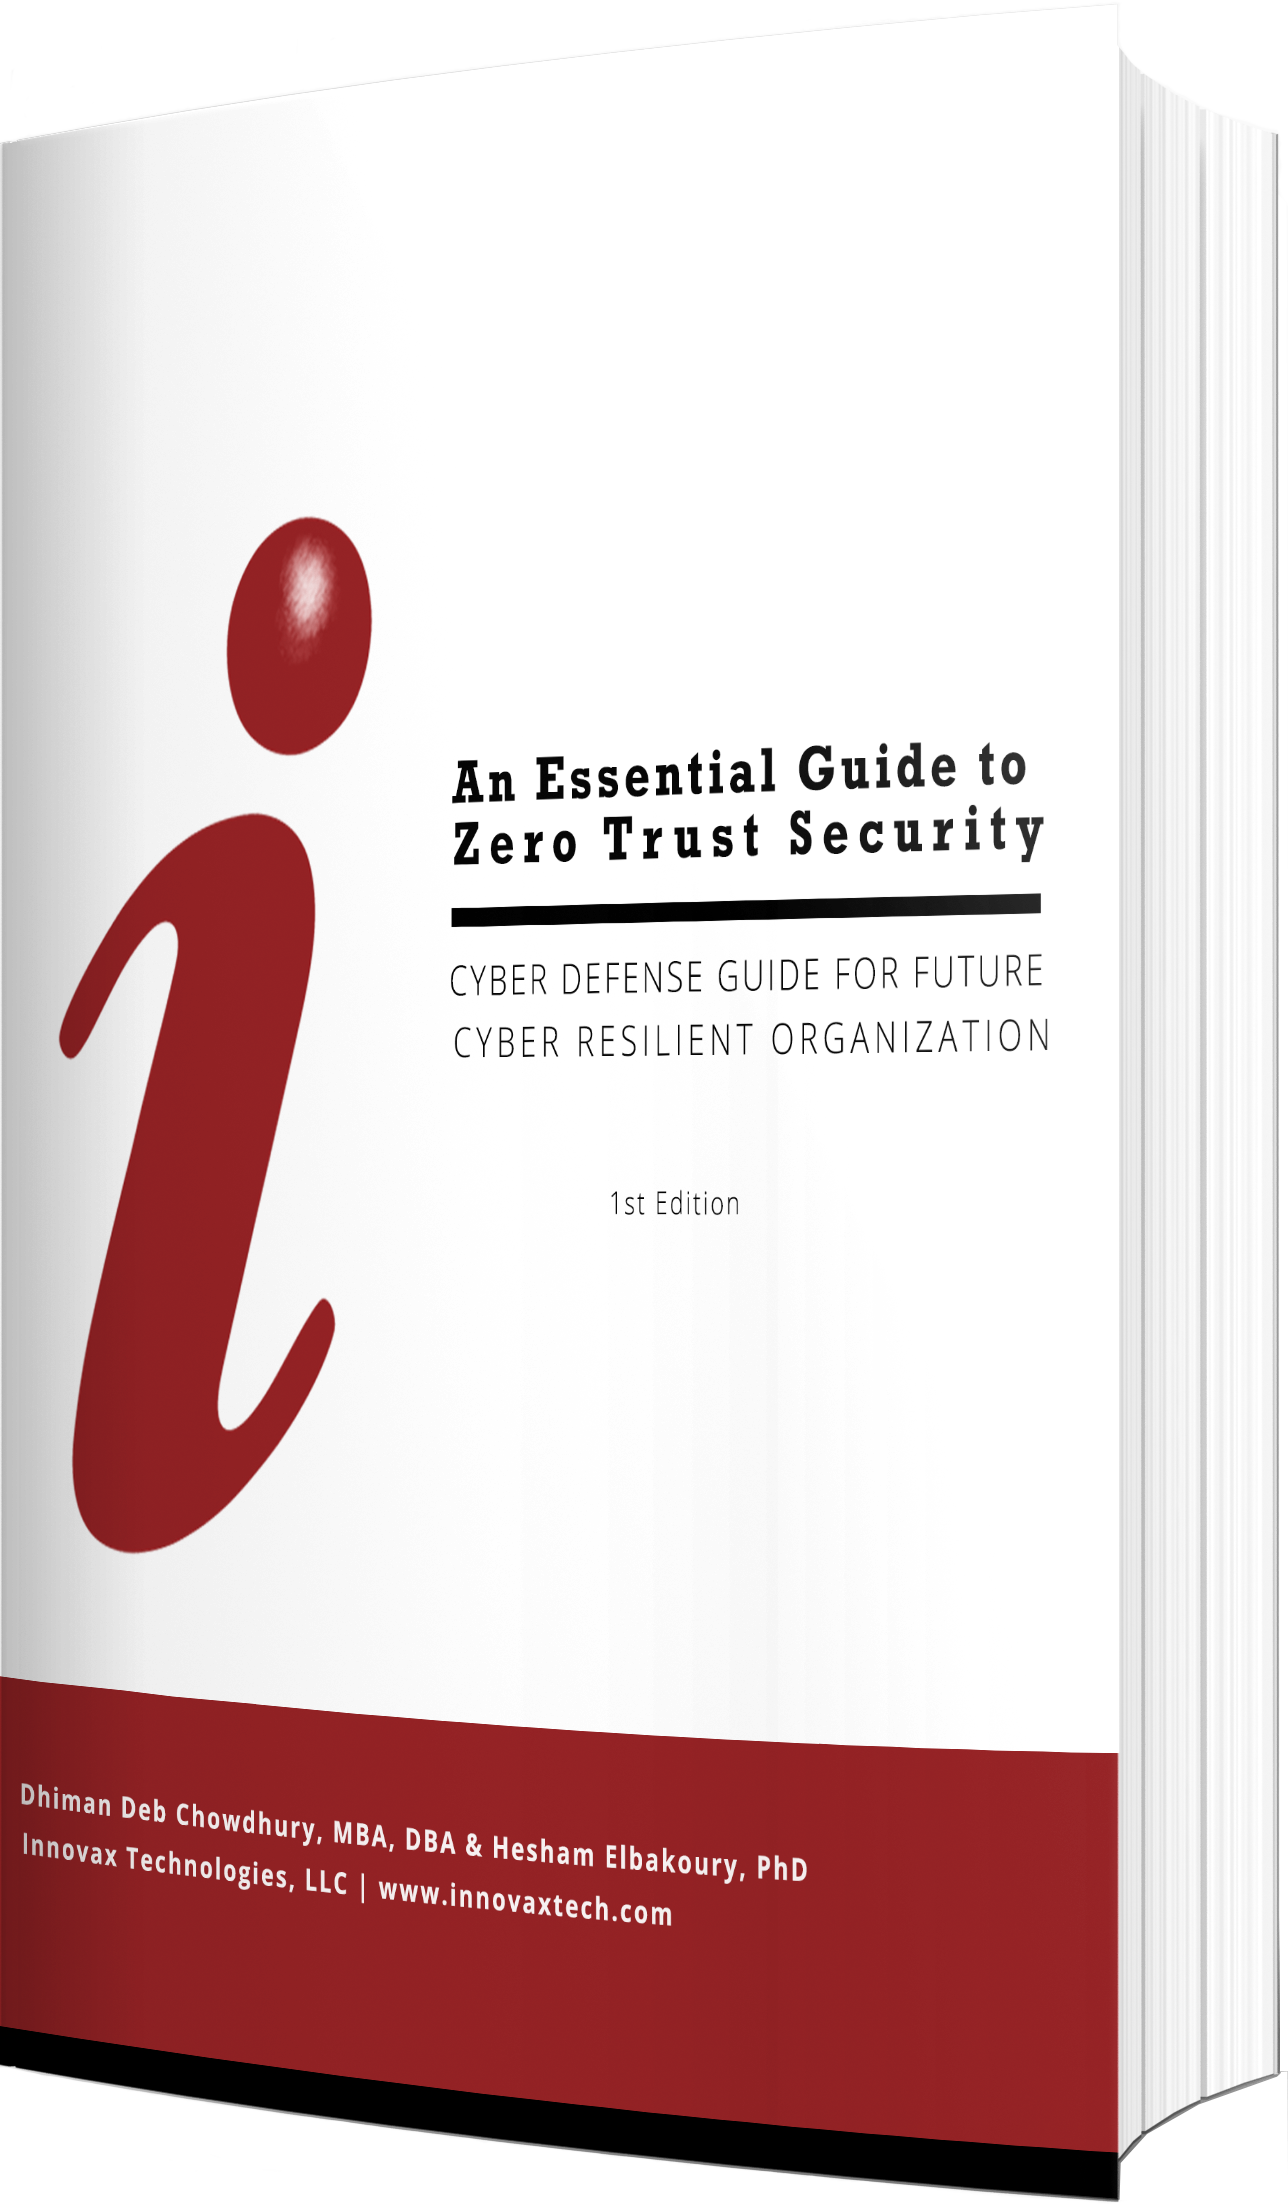 An Essential Guide to Zero Trust Security